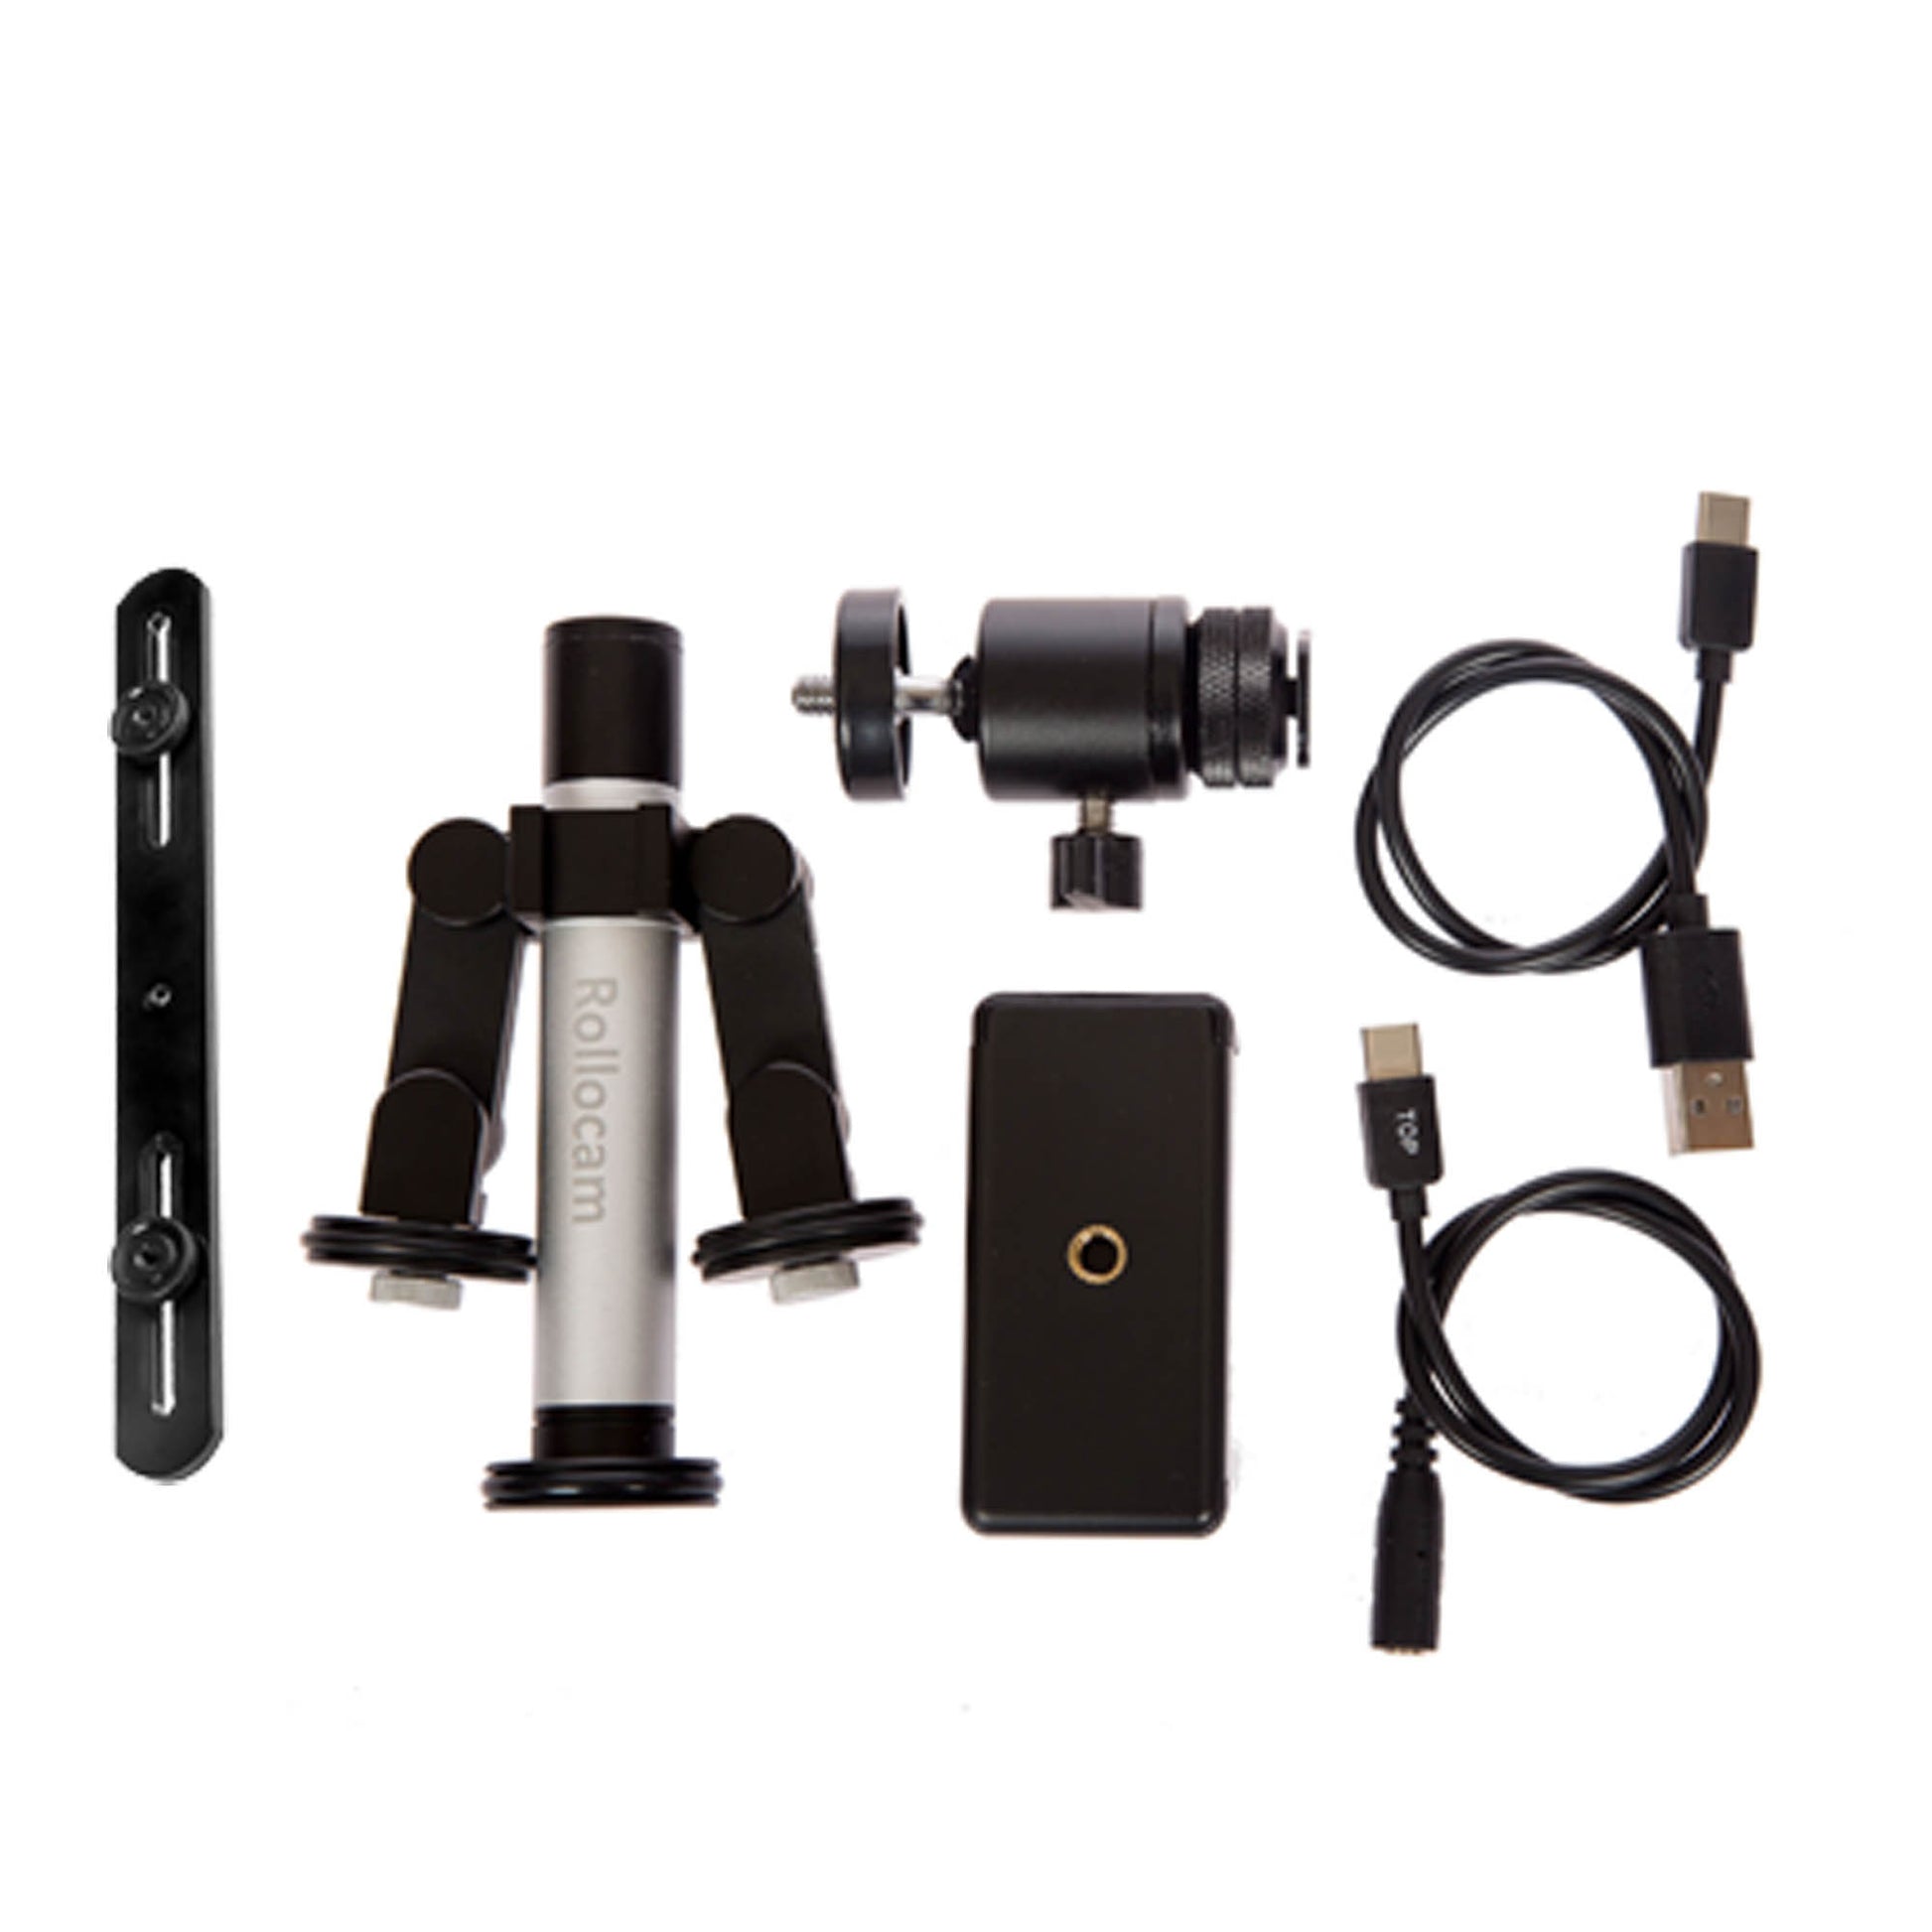 TalentTracker includes phone clamp, ball head, balancing adapter, charging cable, DSLR control port and the Rollocam H-2, the world's most intelligent tripod